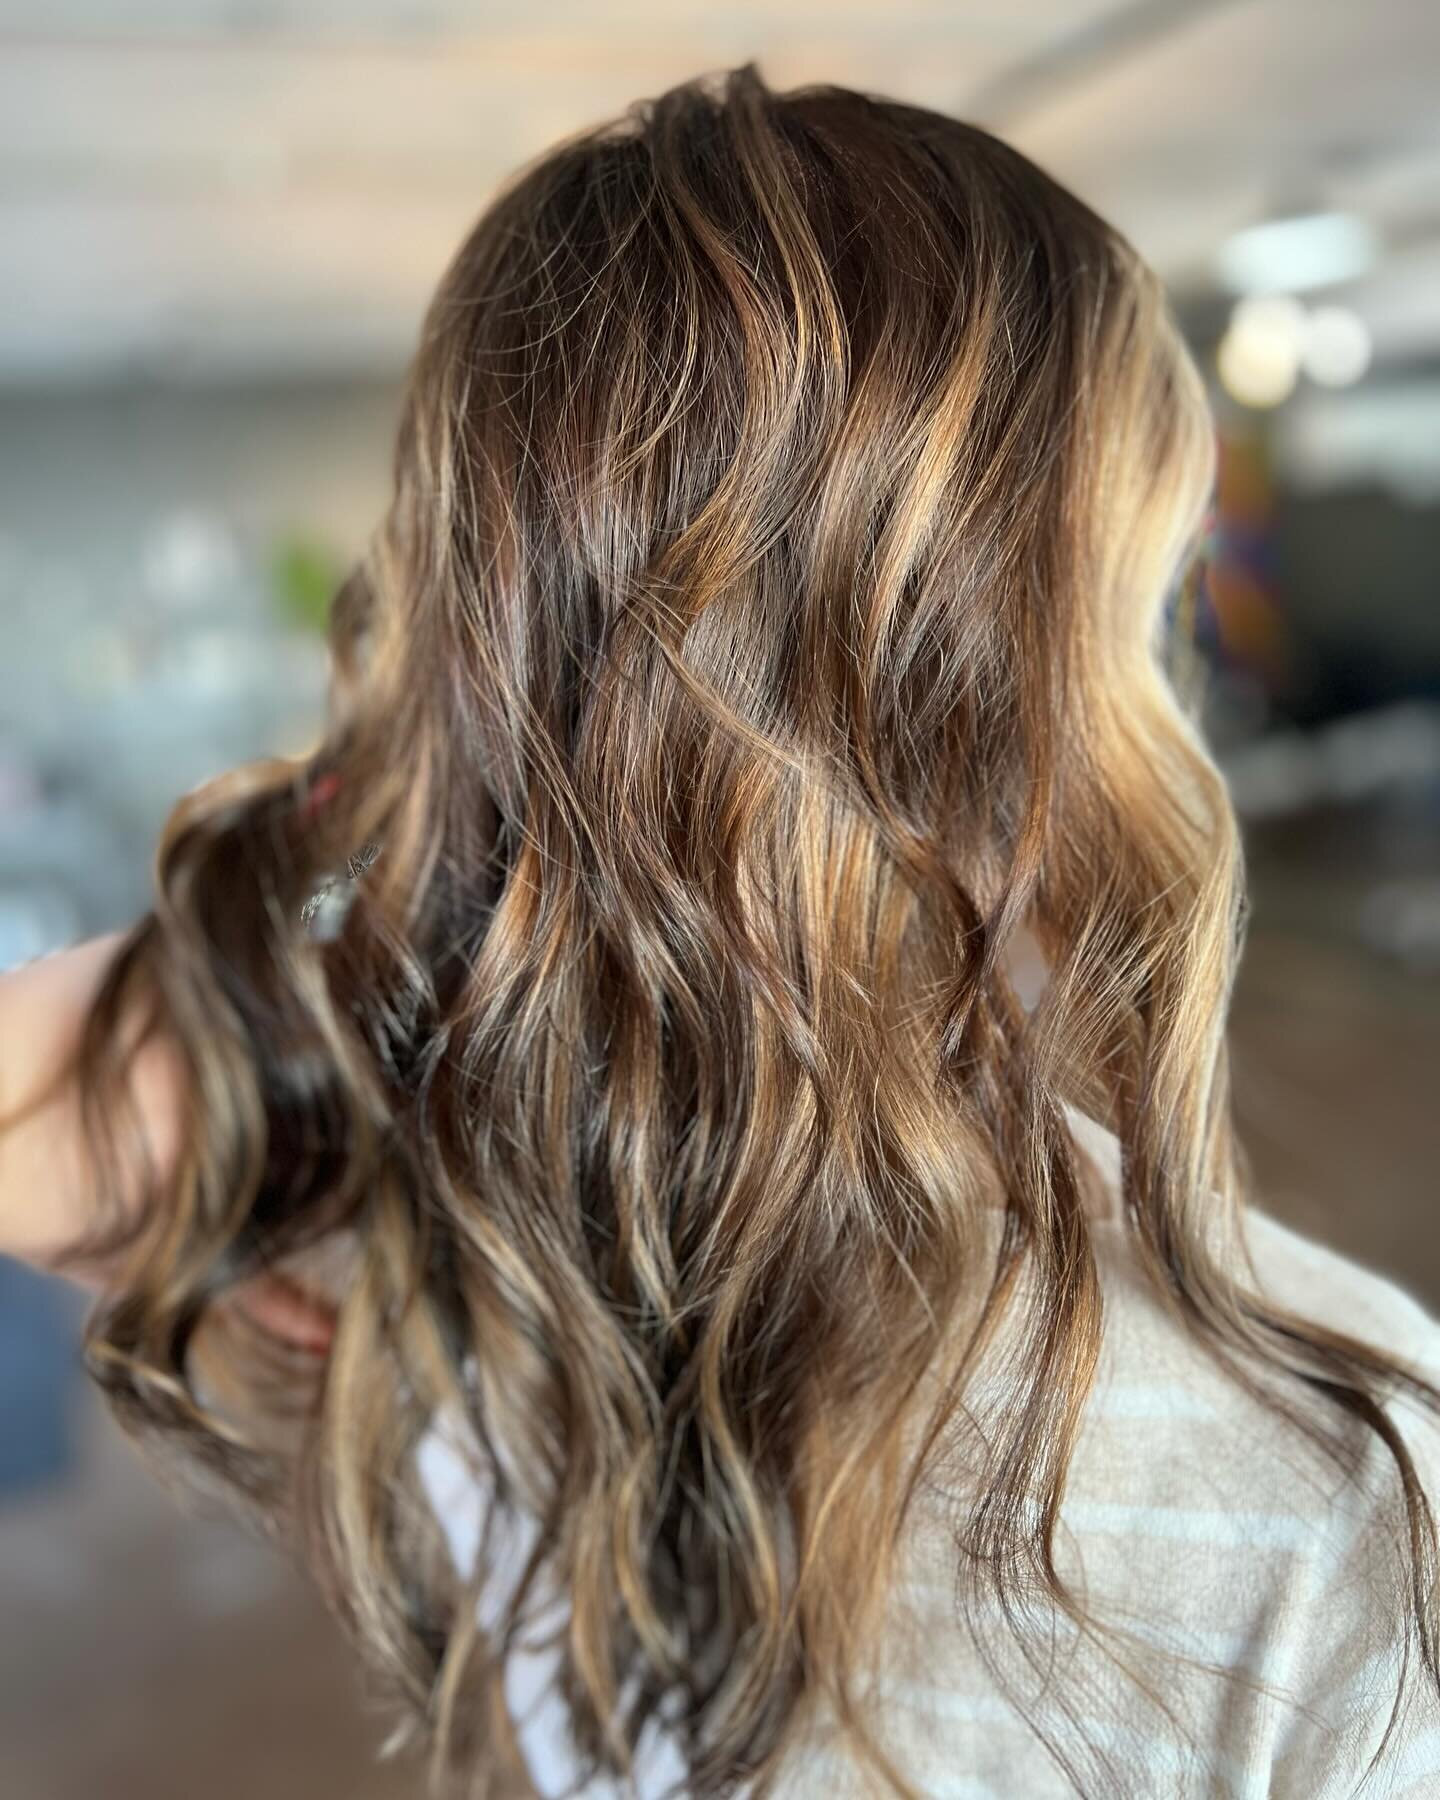 🏈just a little casual hair love for this Super Bowl Sunday! 

We have openings next week! AND it&rsquo;s the last week of our 50% off our Scalp Therapy treatment! 

📞540-812-4454
💻 https://login.meevo.com/ManeStreet/ob?locationId=104526

#showusyo